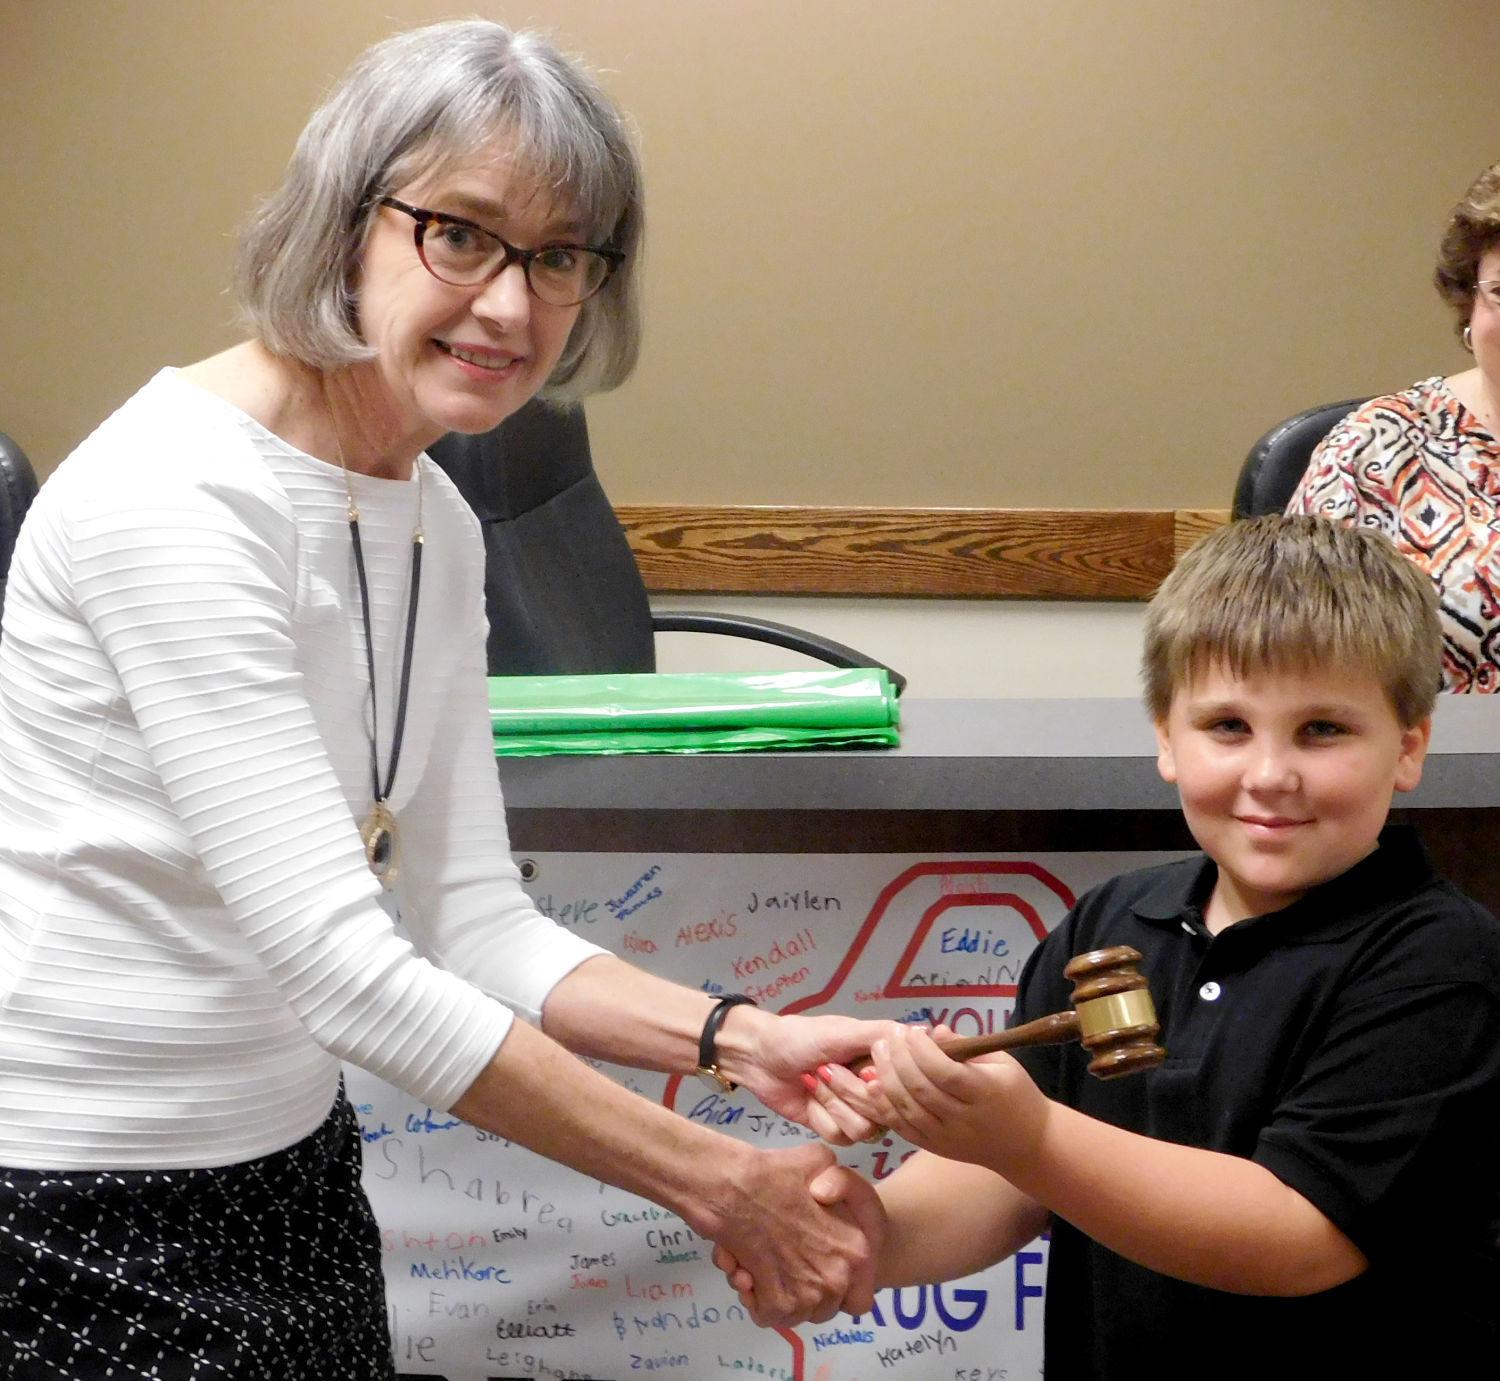 Eli Jeffcoat, 7, served as honorary mayor during North Town Council’s October meeting. Mayor Patty Carson introduced Jeffcoat as a home-schooled student who had been learning about municipal government and hoped to visit the Statehouse in Columbia to see how state government works as well.